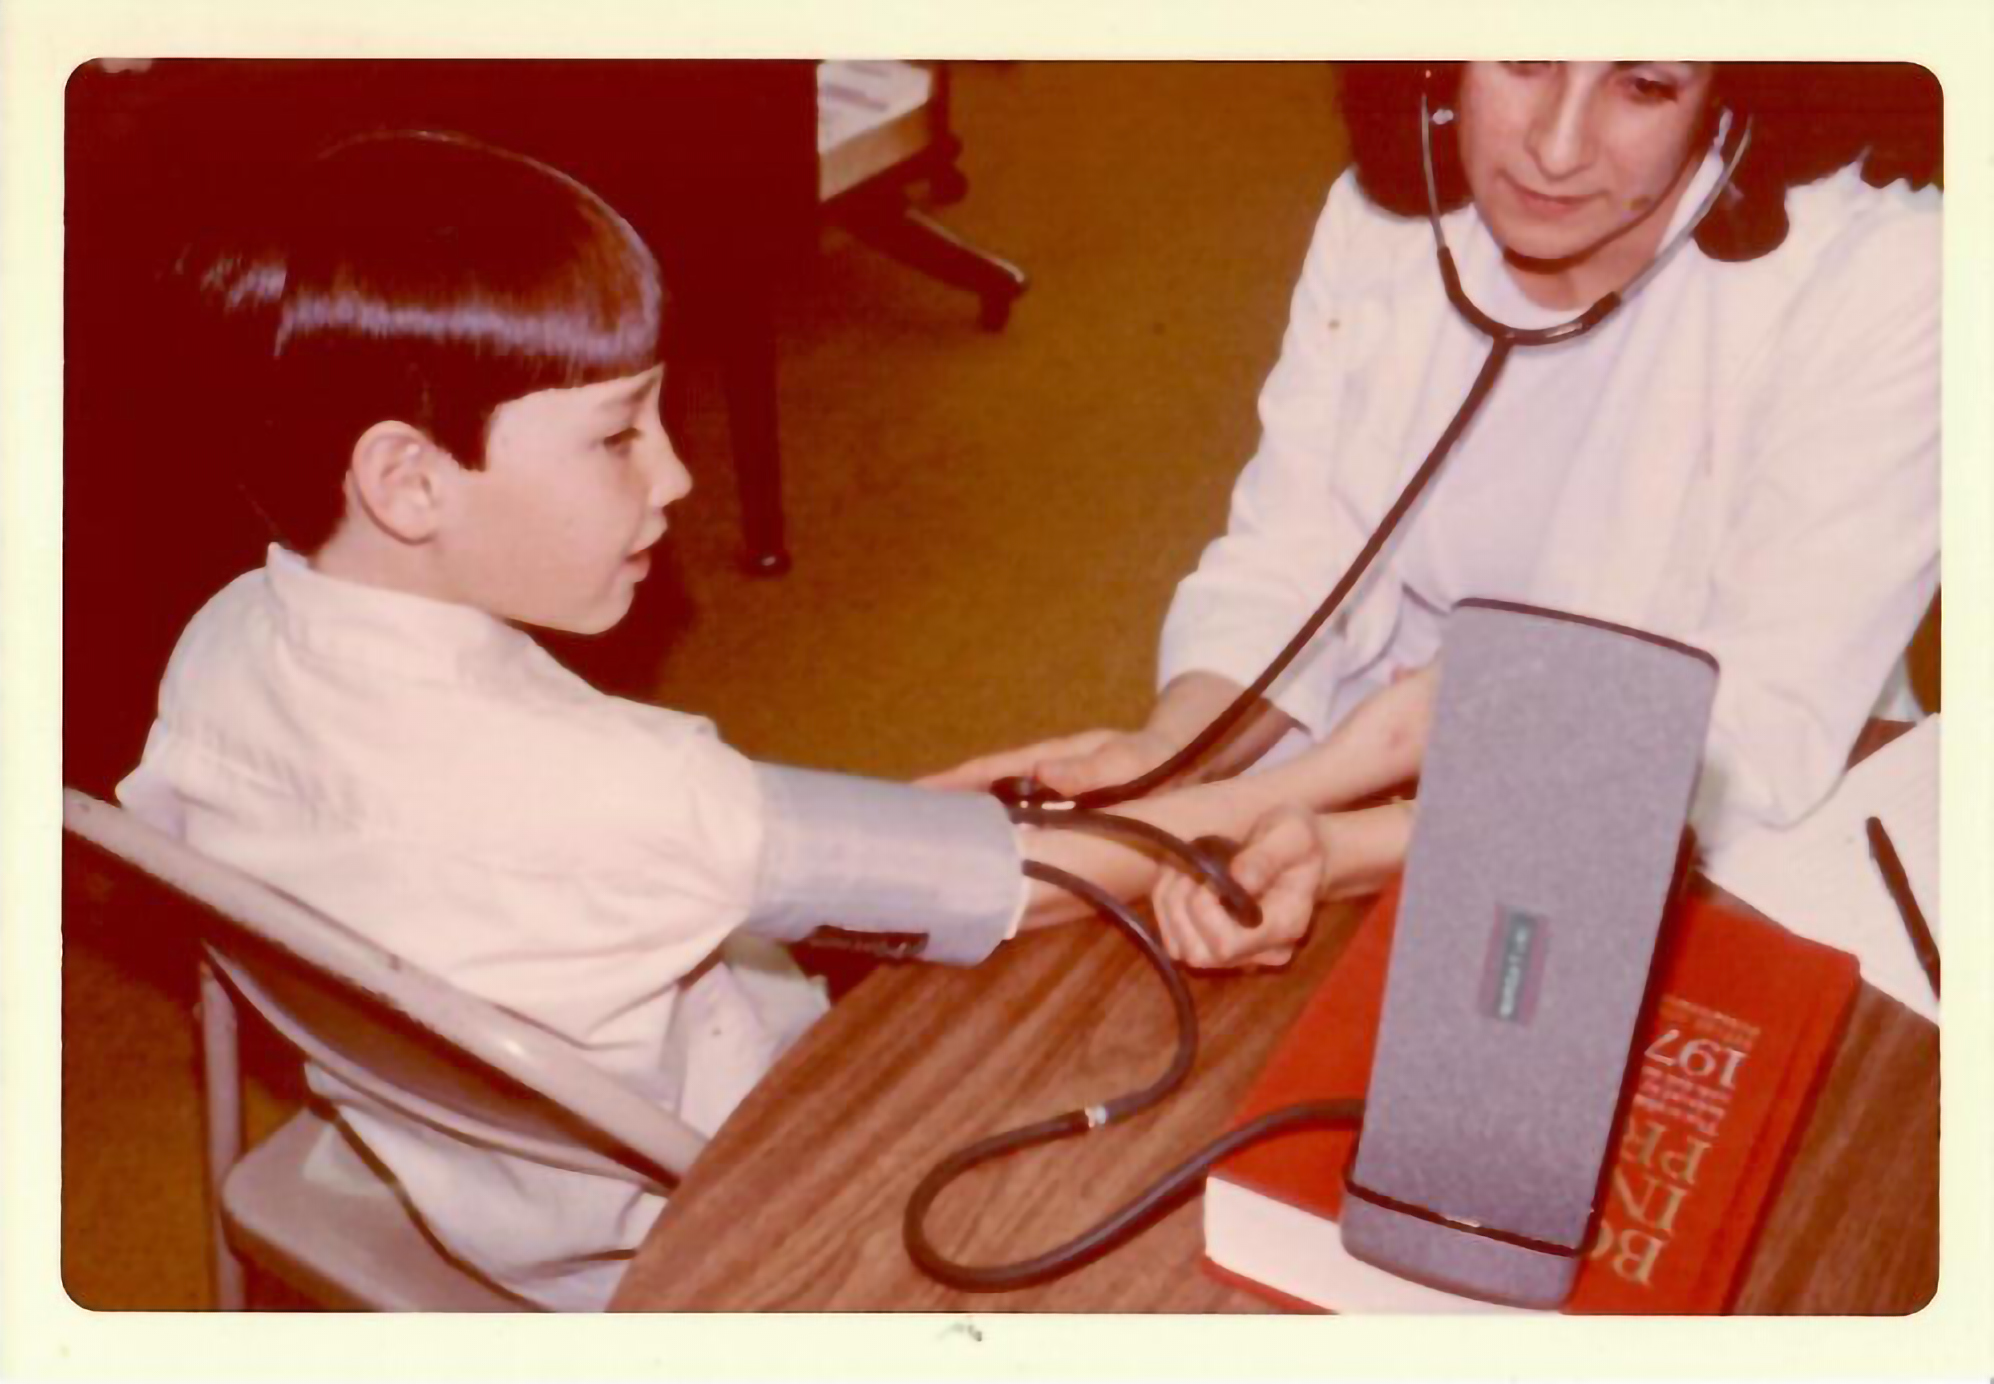 A child's blood pressure reading is taken in 1977 for the Muscatine Heart Study